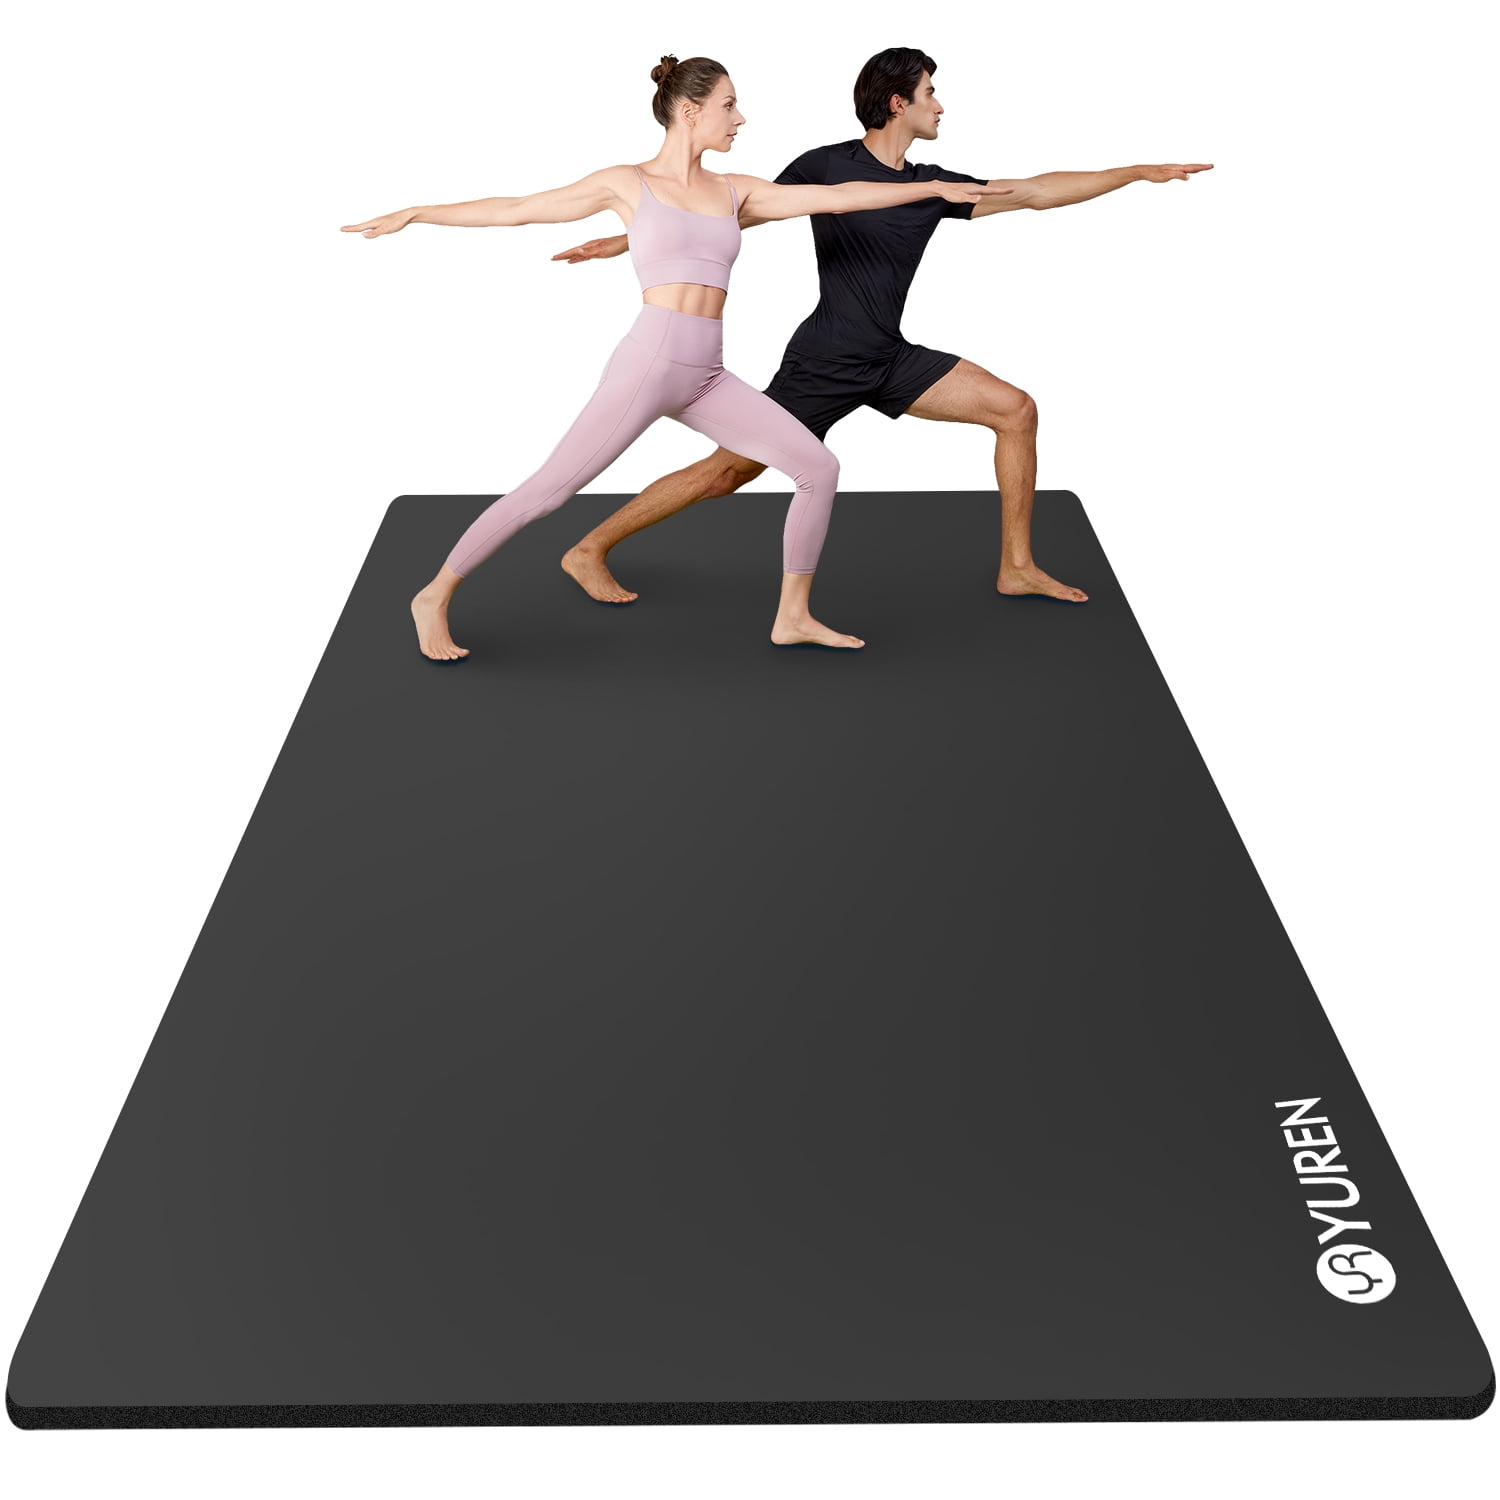 Walleye Jumping Pattern TPE Yoga Mat for Workout & Exercise - Eco-friendly  & Non-slip Fitness Mat 